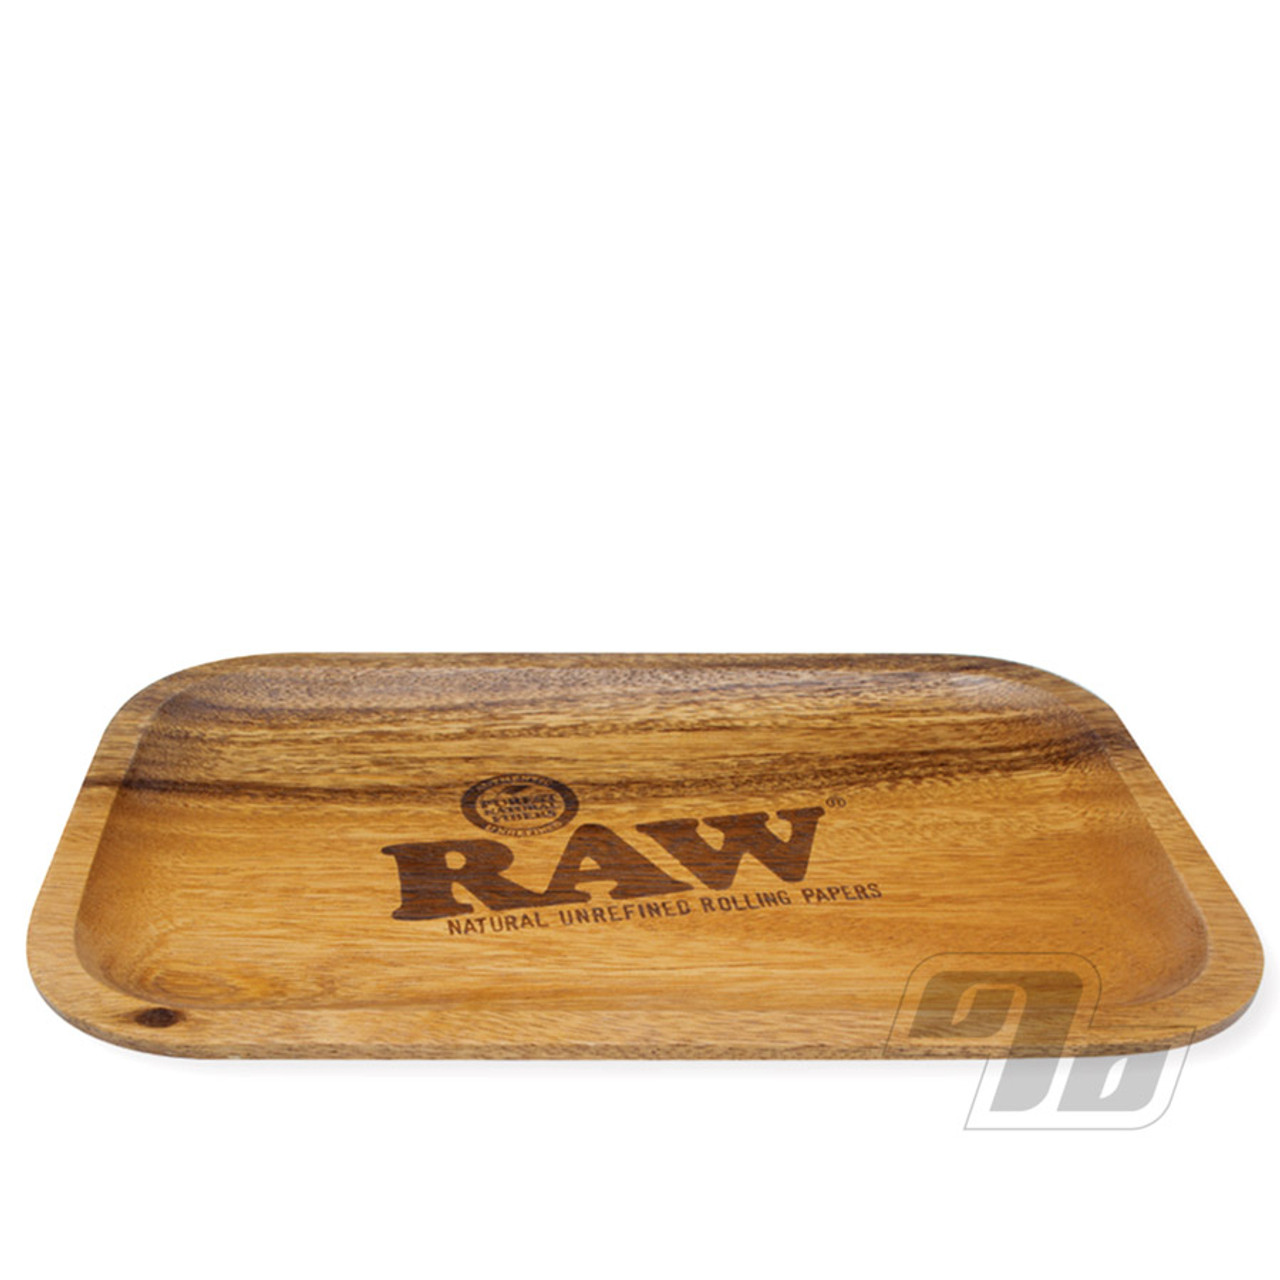 RAW Rolling Papers ACACIA Wooden wood TRAYS 11x7 w/ Storage Bags Buy Five